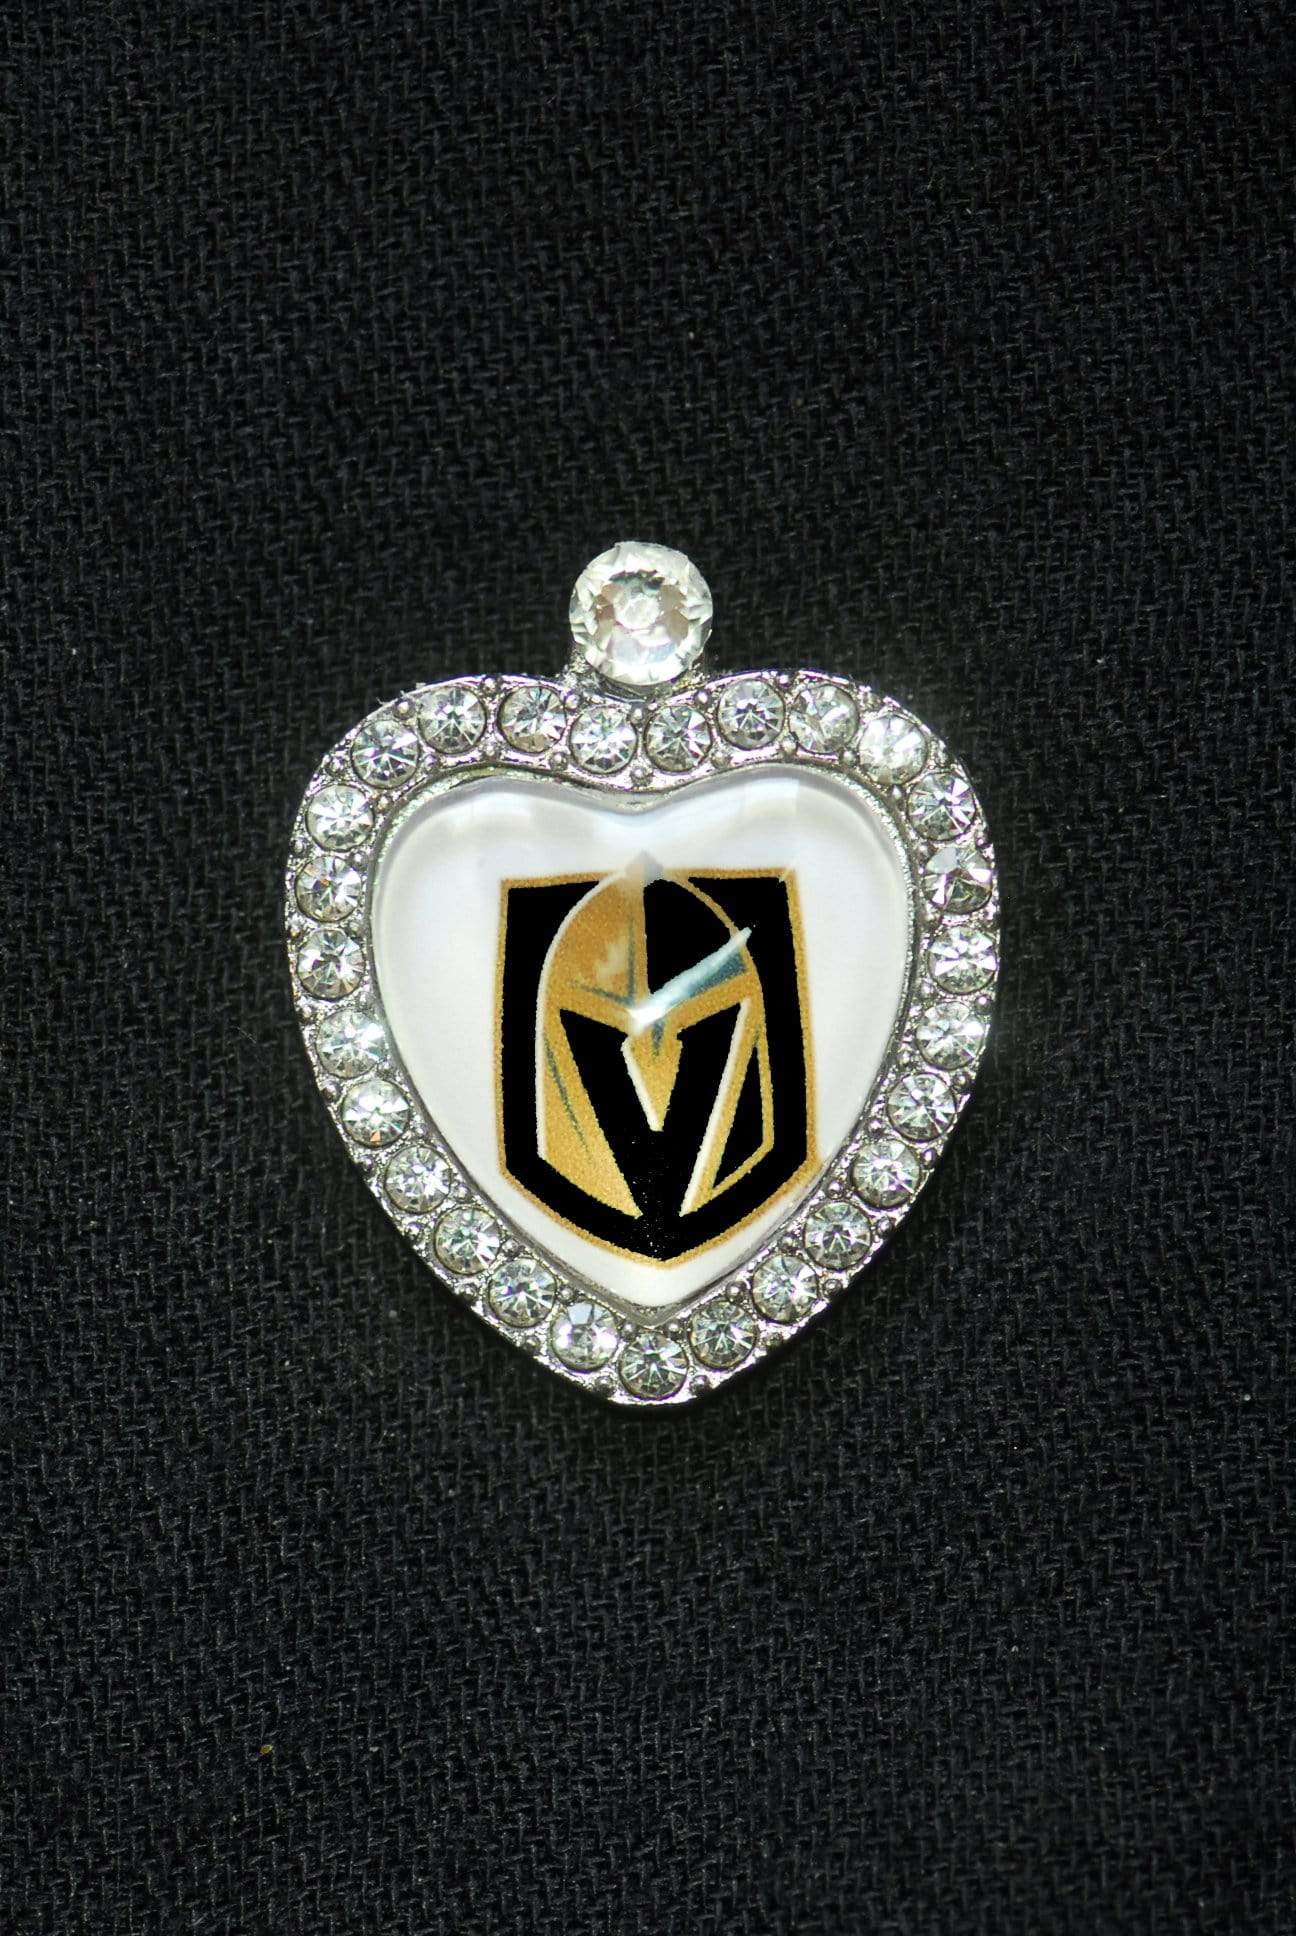 Drinkware C-VGN White Heart Tipsy Sip 1 1/8" X 7/8" Winey Bitches Co Tipsy Sips Las Vegas Golden Knights "Magnetic Bling for your Glass" Many styles to choose from WineyBitchesCo